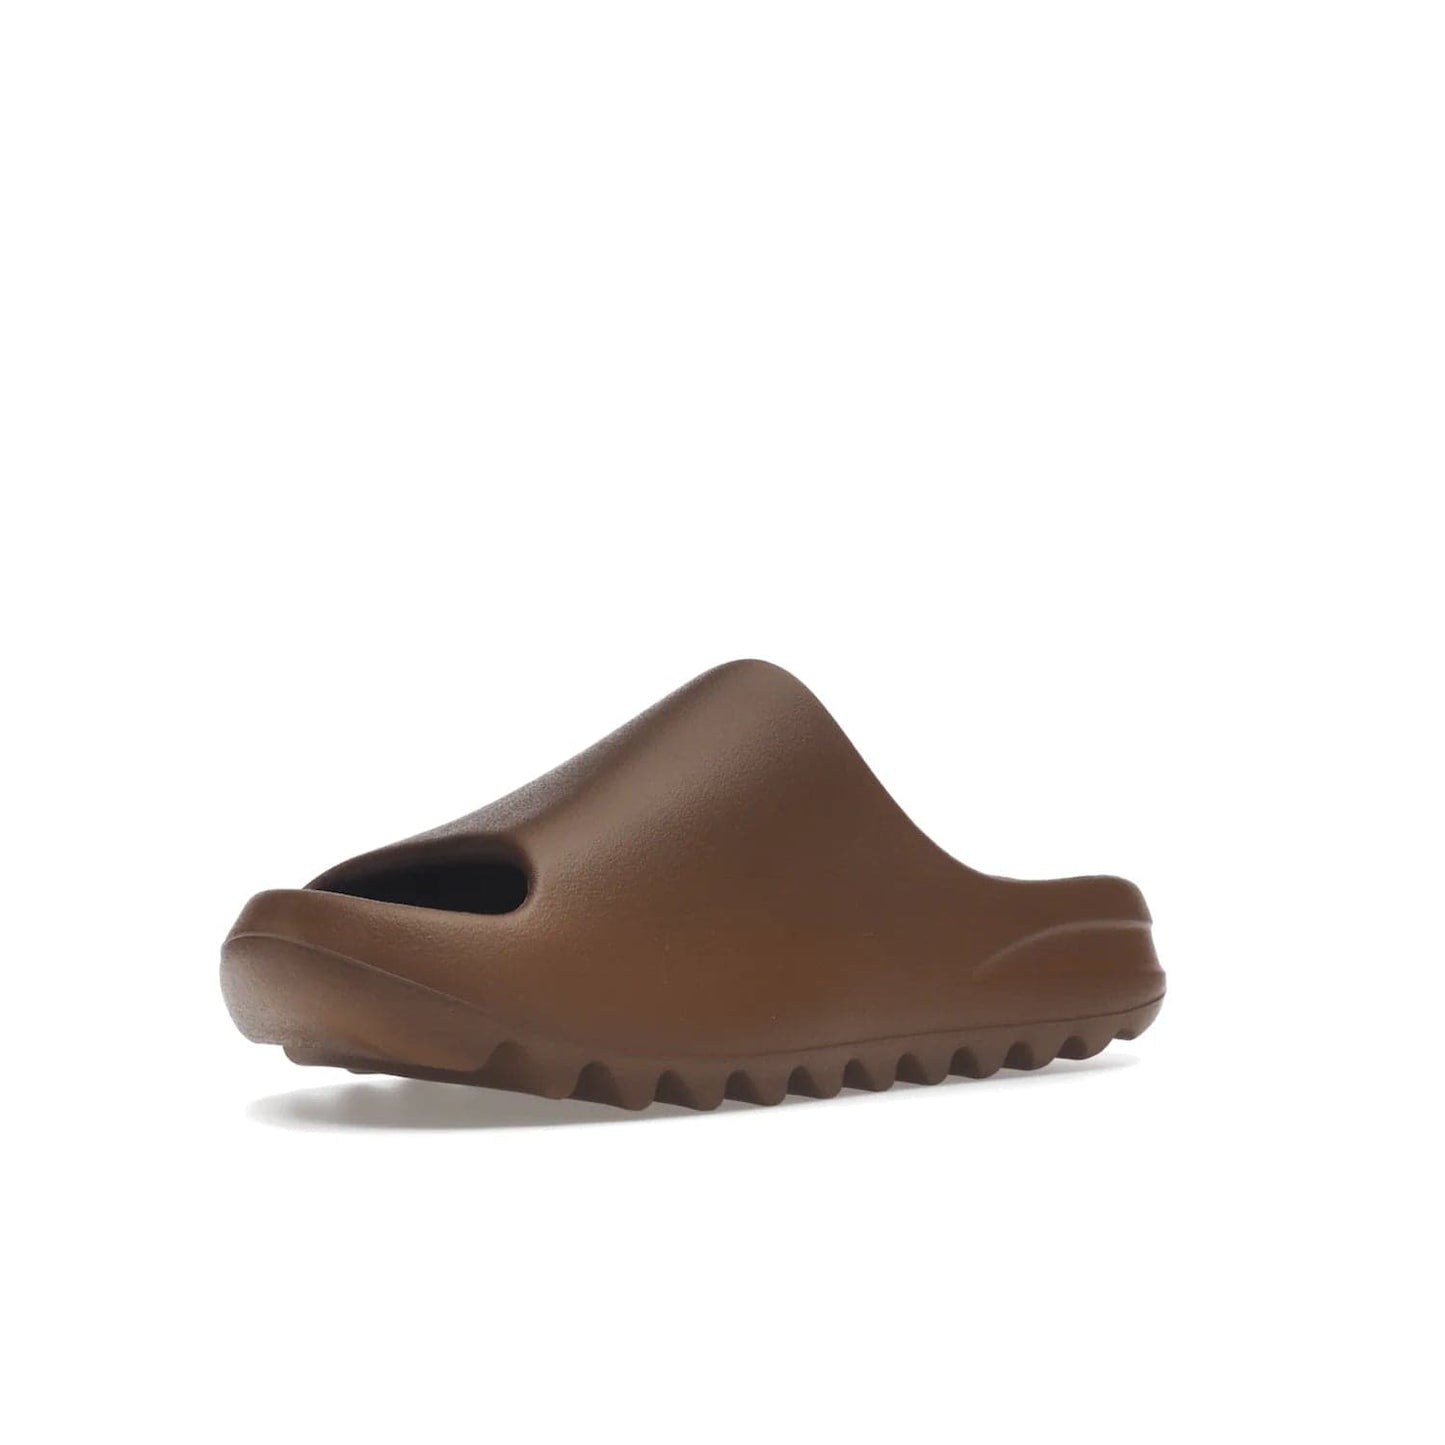 adidas Yeezy Slide Flax - Image 15 - Only at www.BallersClubKickz.com - Score the perfect casual look with the adidas Yeezy Slide Flax. Made with lightweight injected EVA plus horizontal grooves underfoot for traction. Release on August 22, 2022. $70.